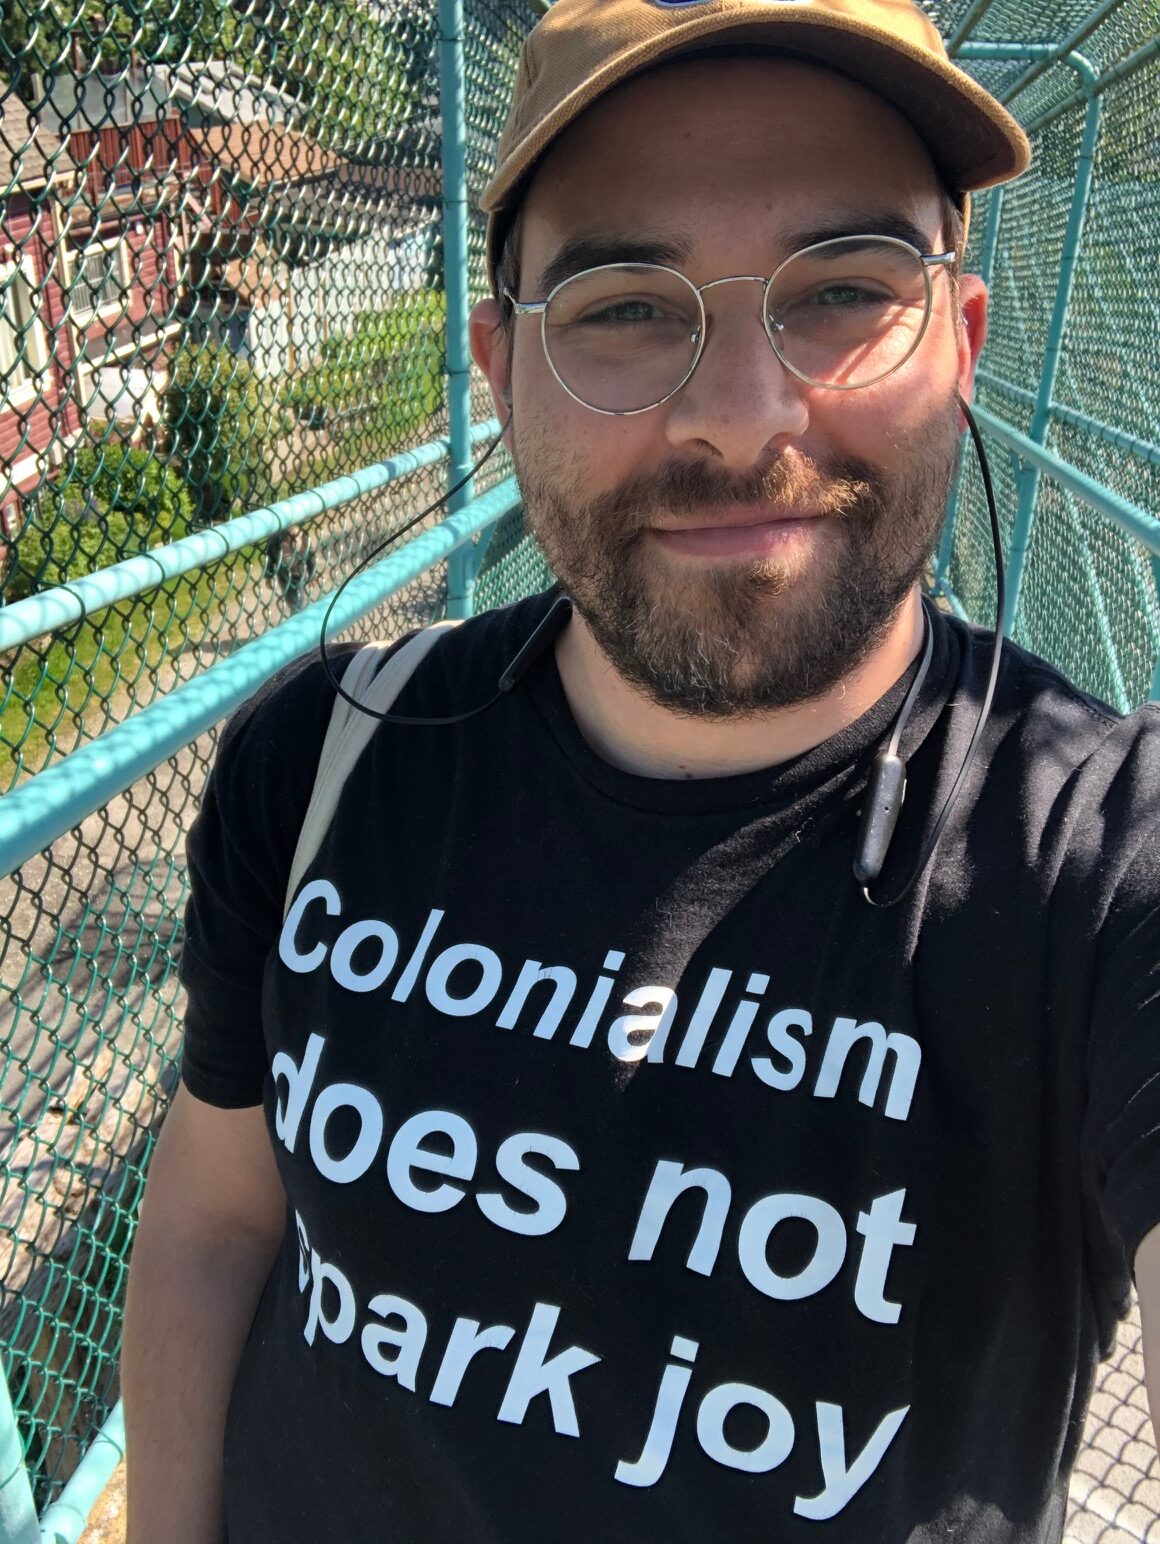 non-binary person with a brown beard wearing a baseball hat, glasses and a tee-shirt that reads 'colonialism does not spark joy'